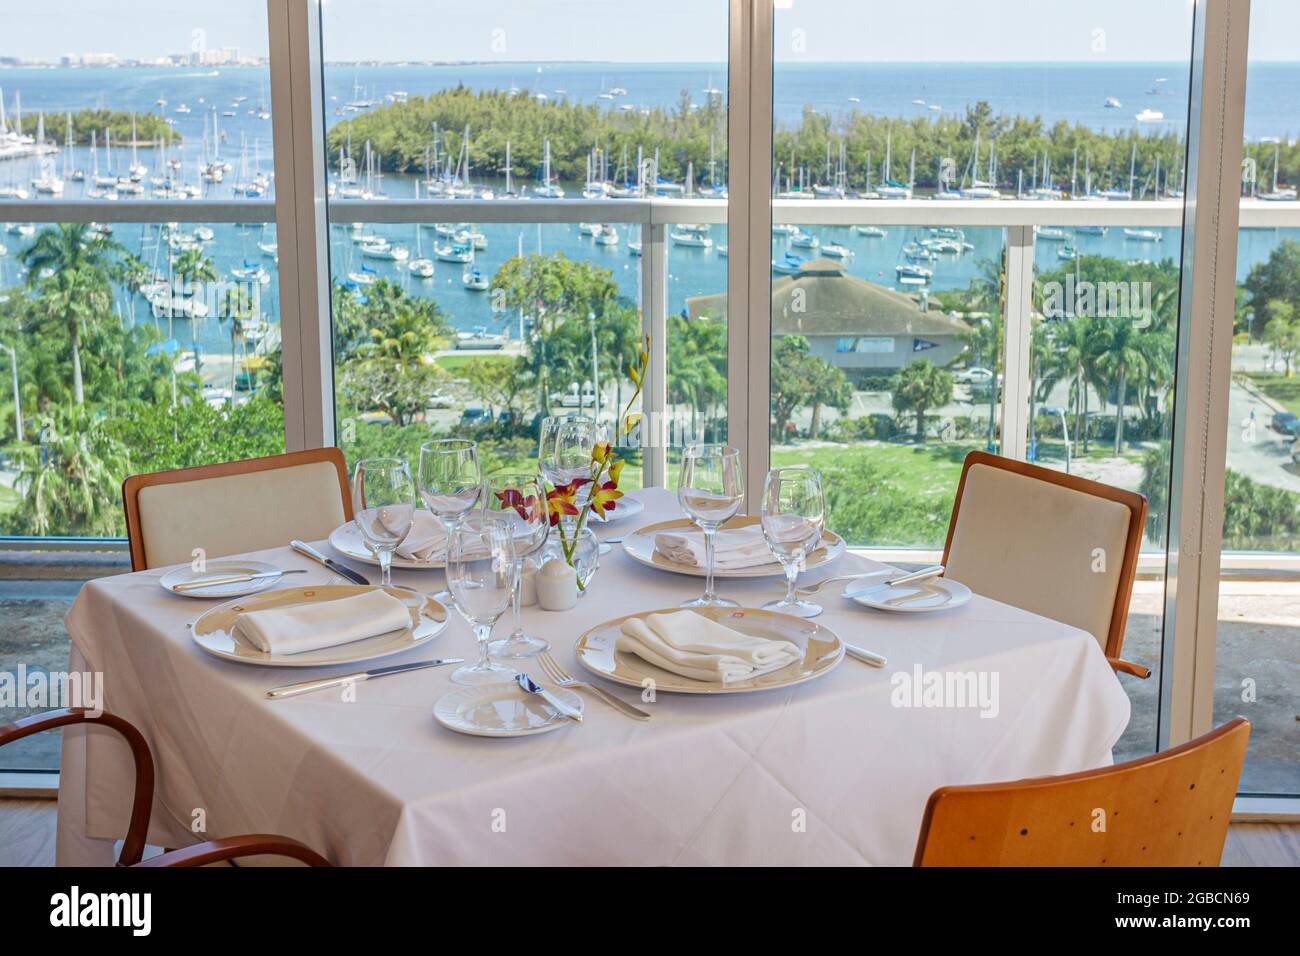 Miami Florida,Coconut Grove Sonesta hotel Panorama restaurant,Biscayne Bay water view dining table, Stock Photo